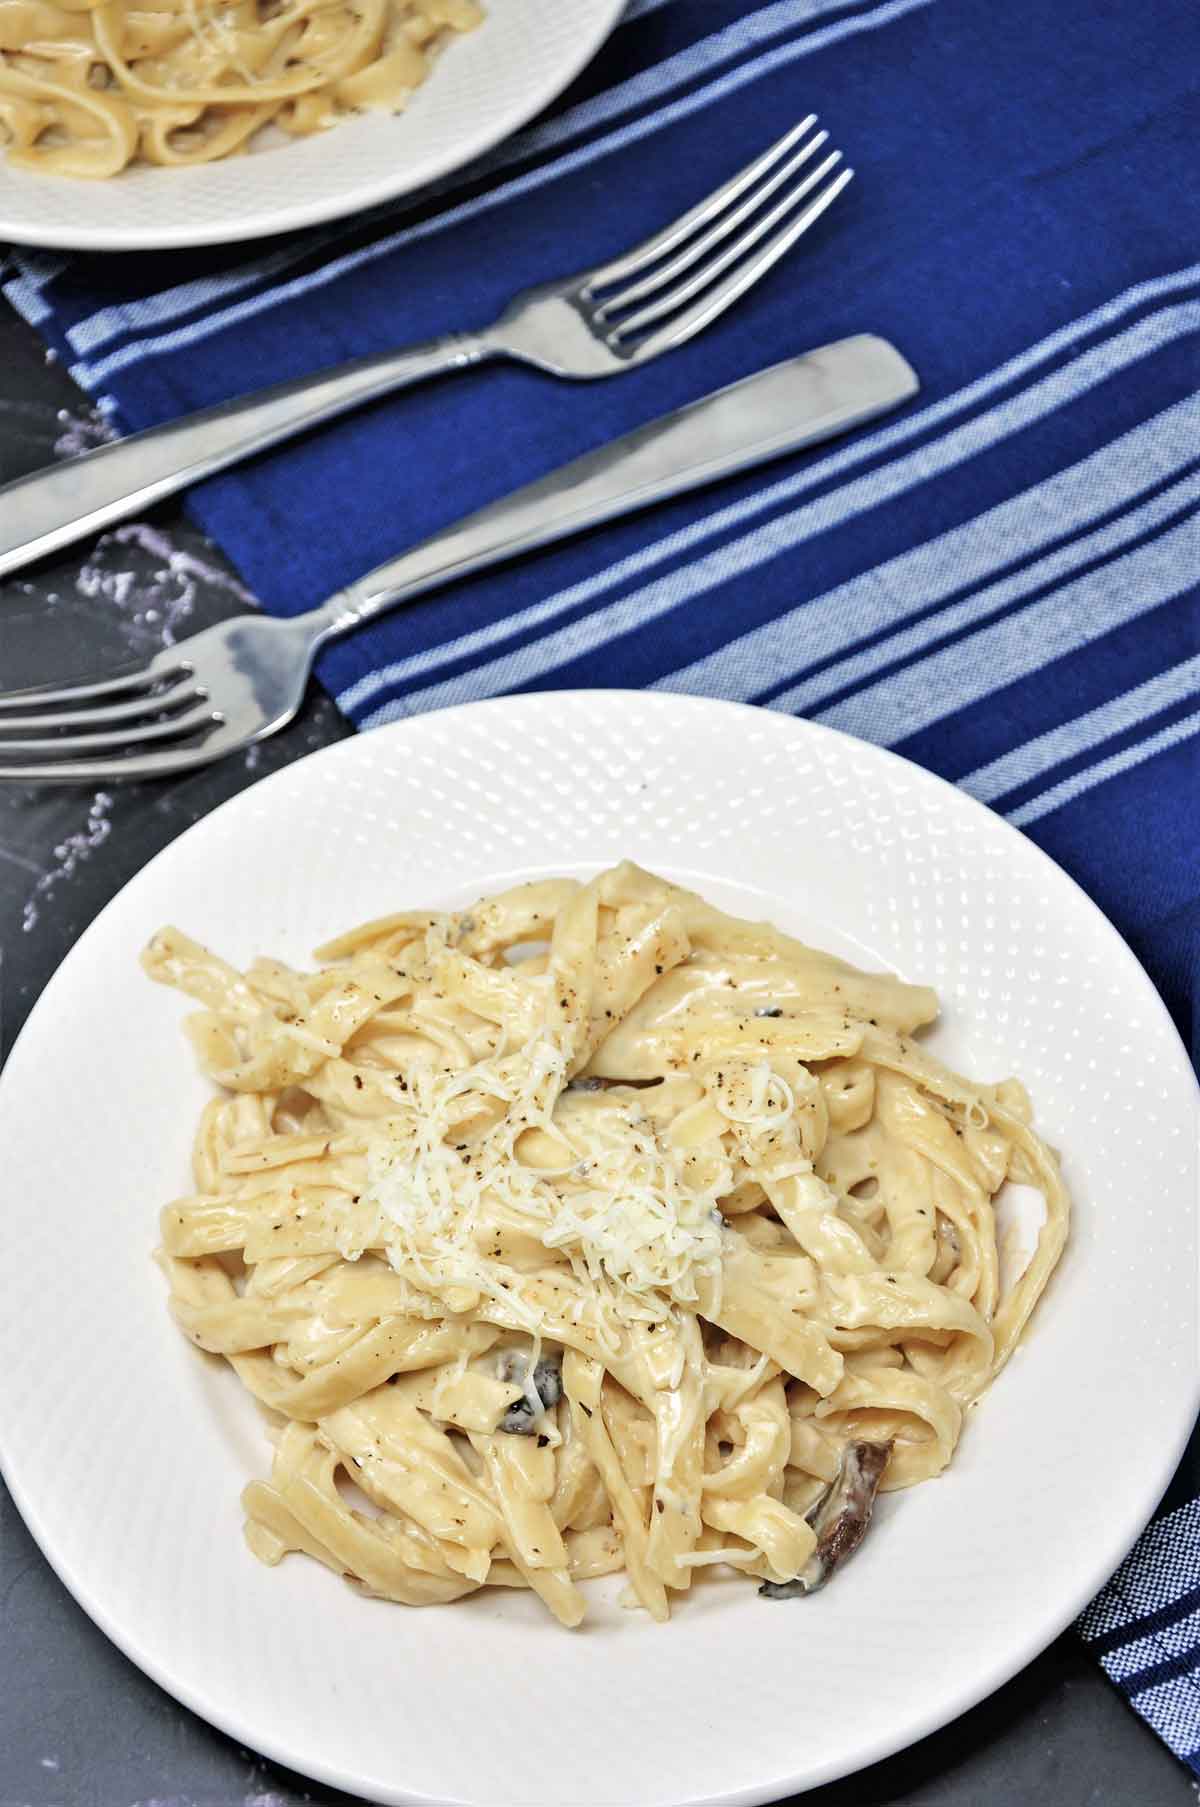 Fettuccini Alfredo served in a plate with shredded cheese topping.